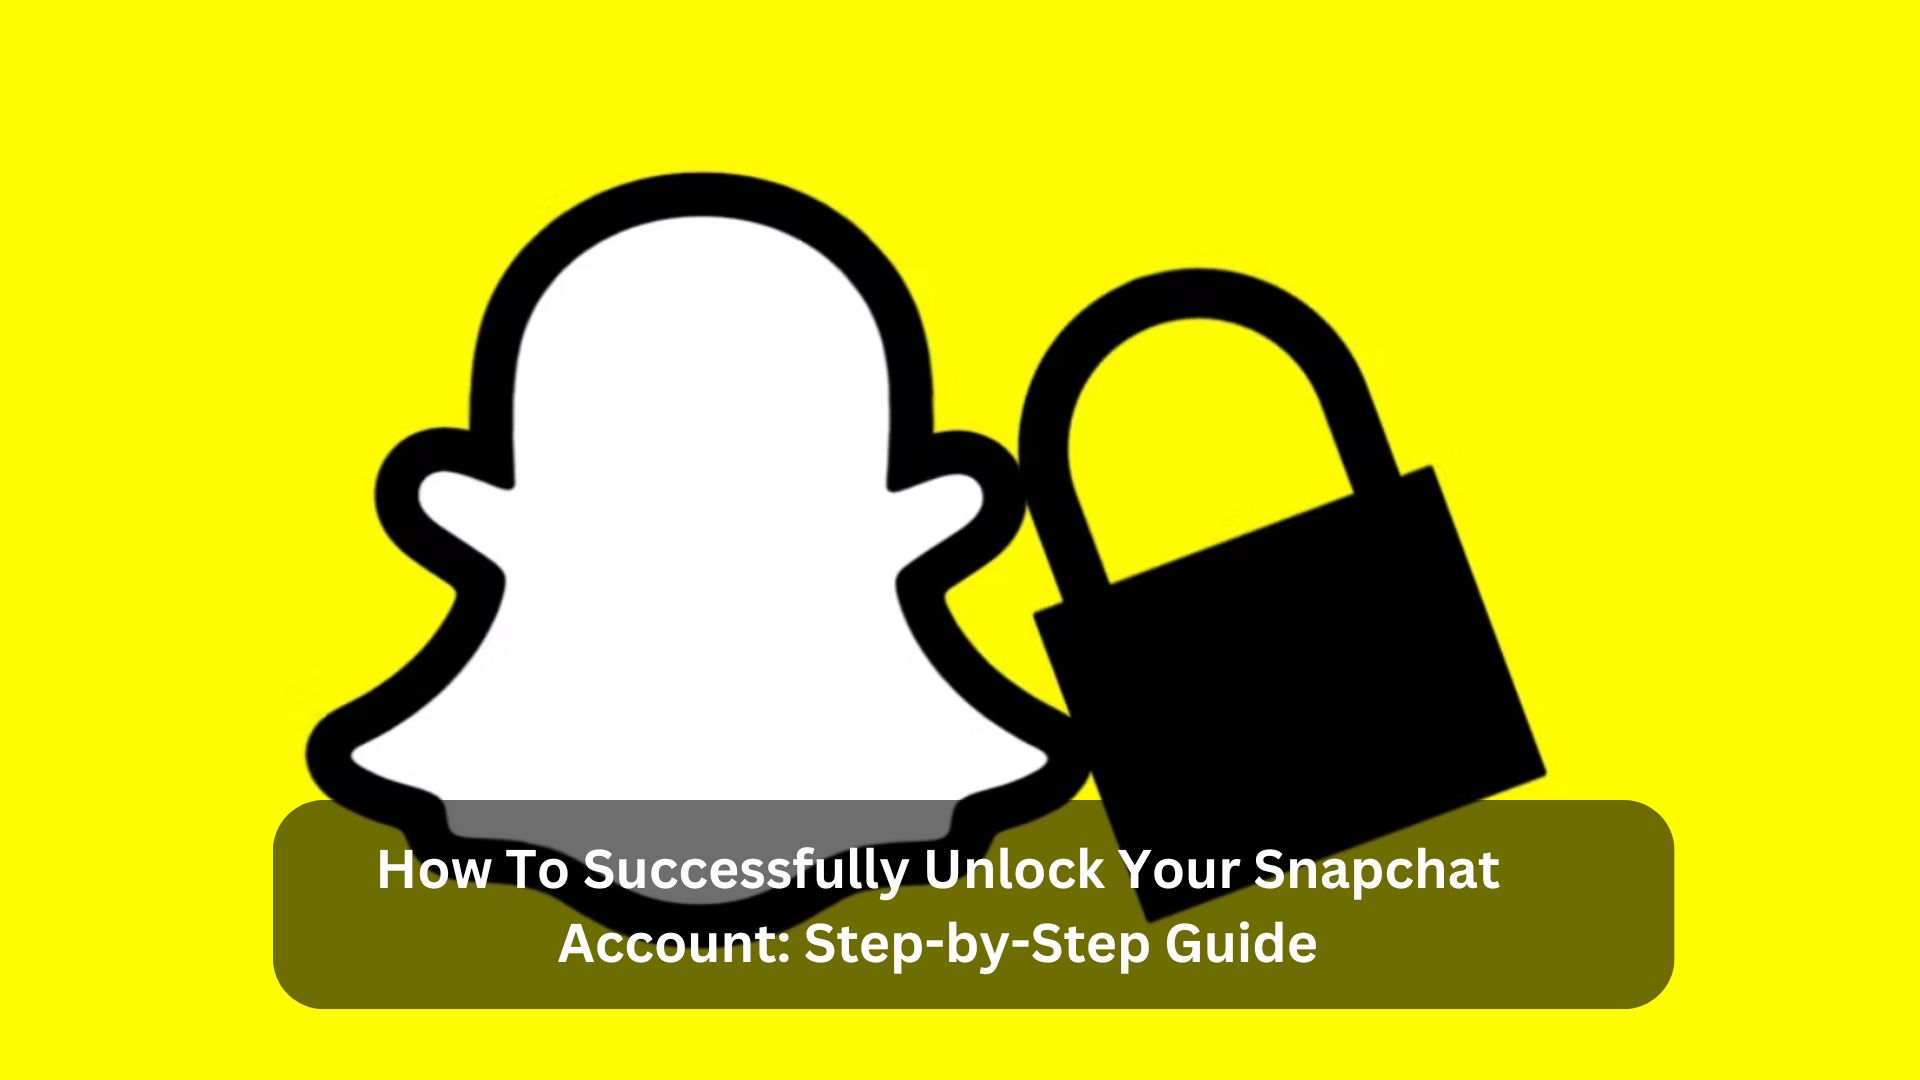 How To Successfully Unlock Your Snapchat Account: Step-by-Step Guide